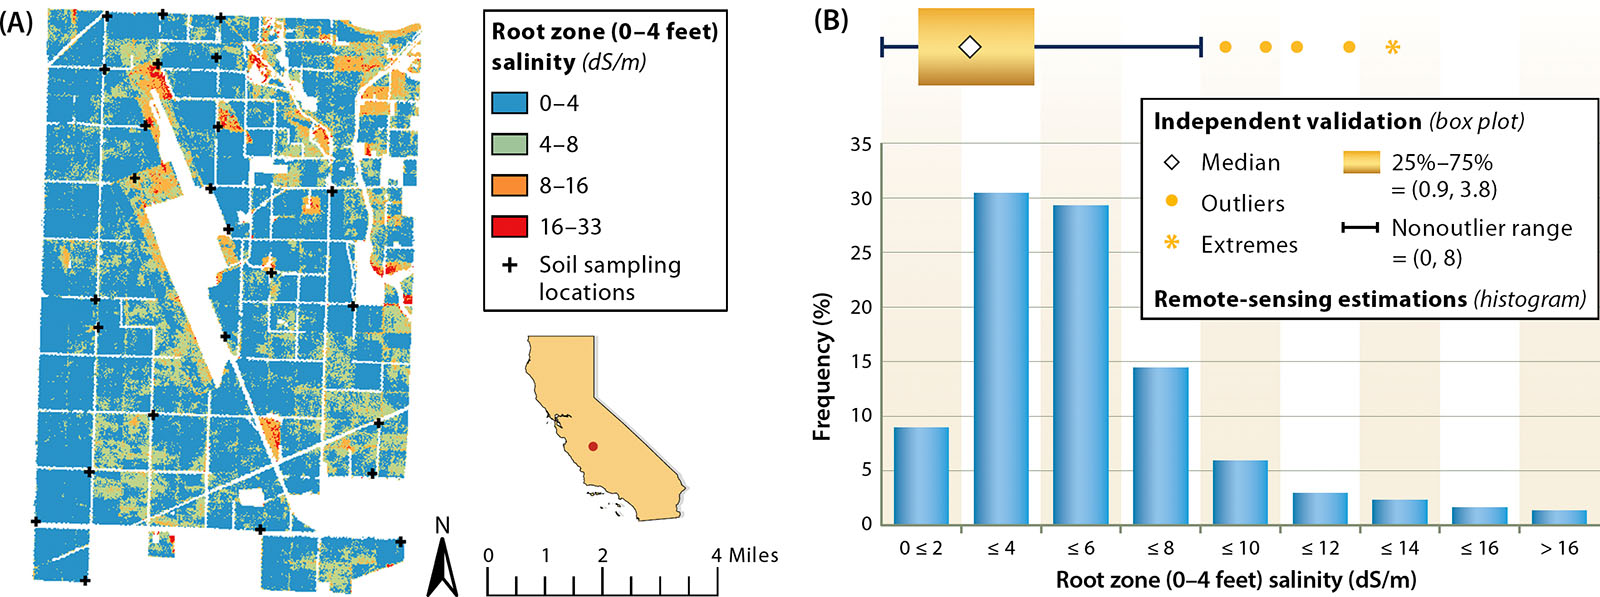 (A) Remote-sensing estimations of root zone salinity over ∼ 4,000 acres of farmland in Lemoore (Kings County) and (B) the comparison of the remote-sensing estimations frequency distribution with that of independent soil measurements.